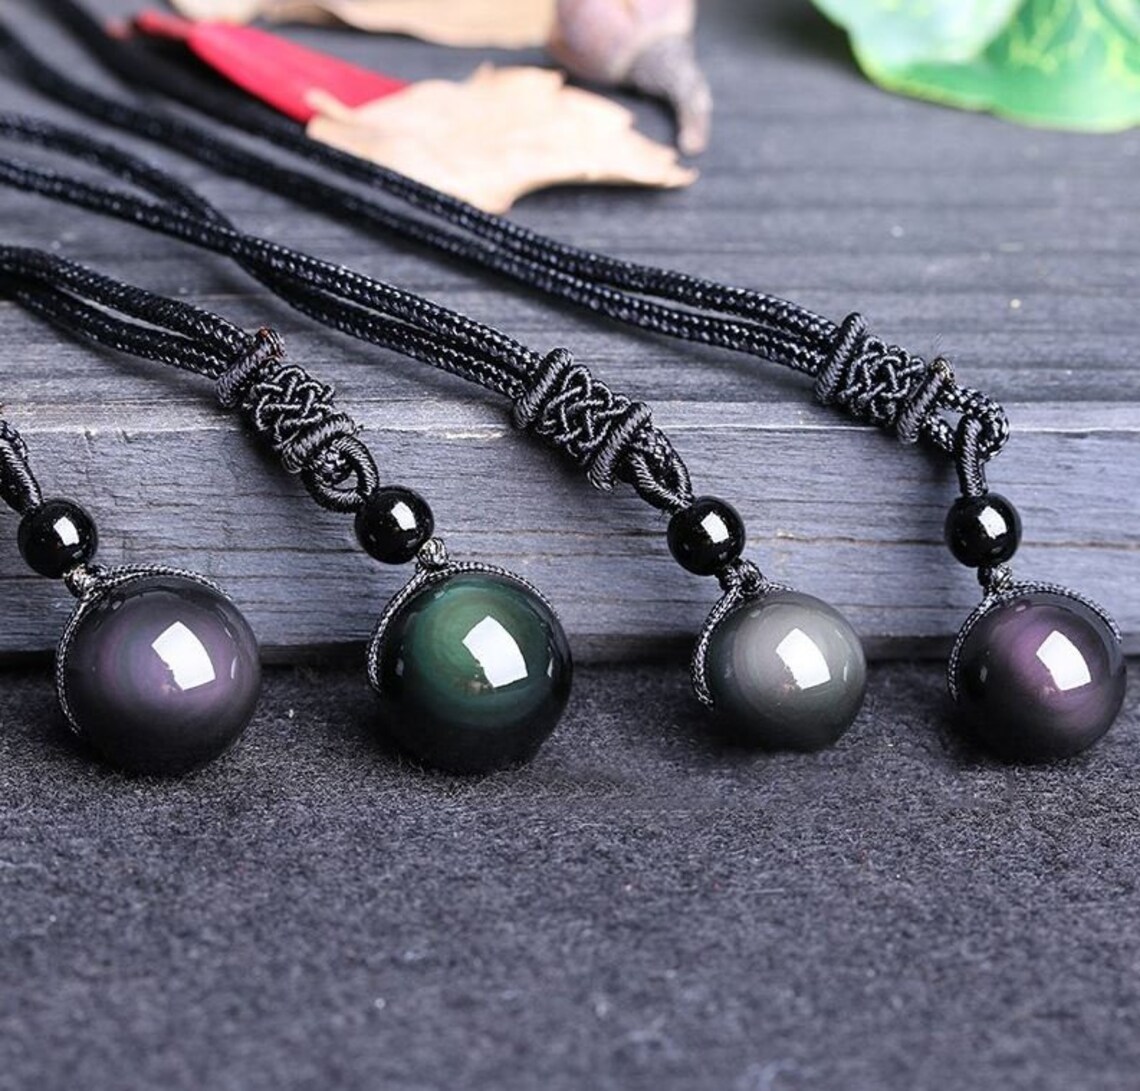 Obsidian Stone Necklace Protection Stone Natural Obsidian - Etsy